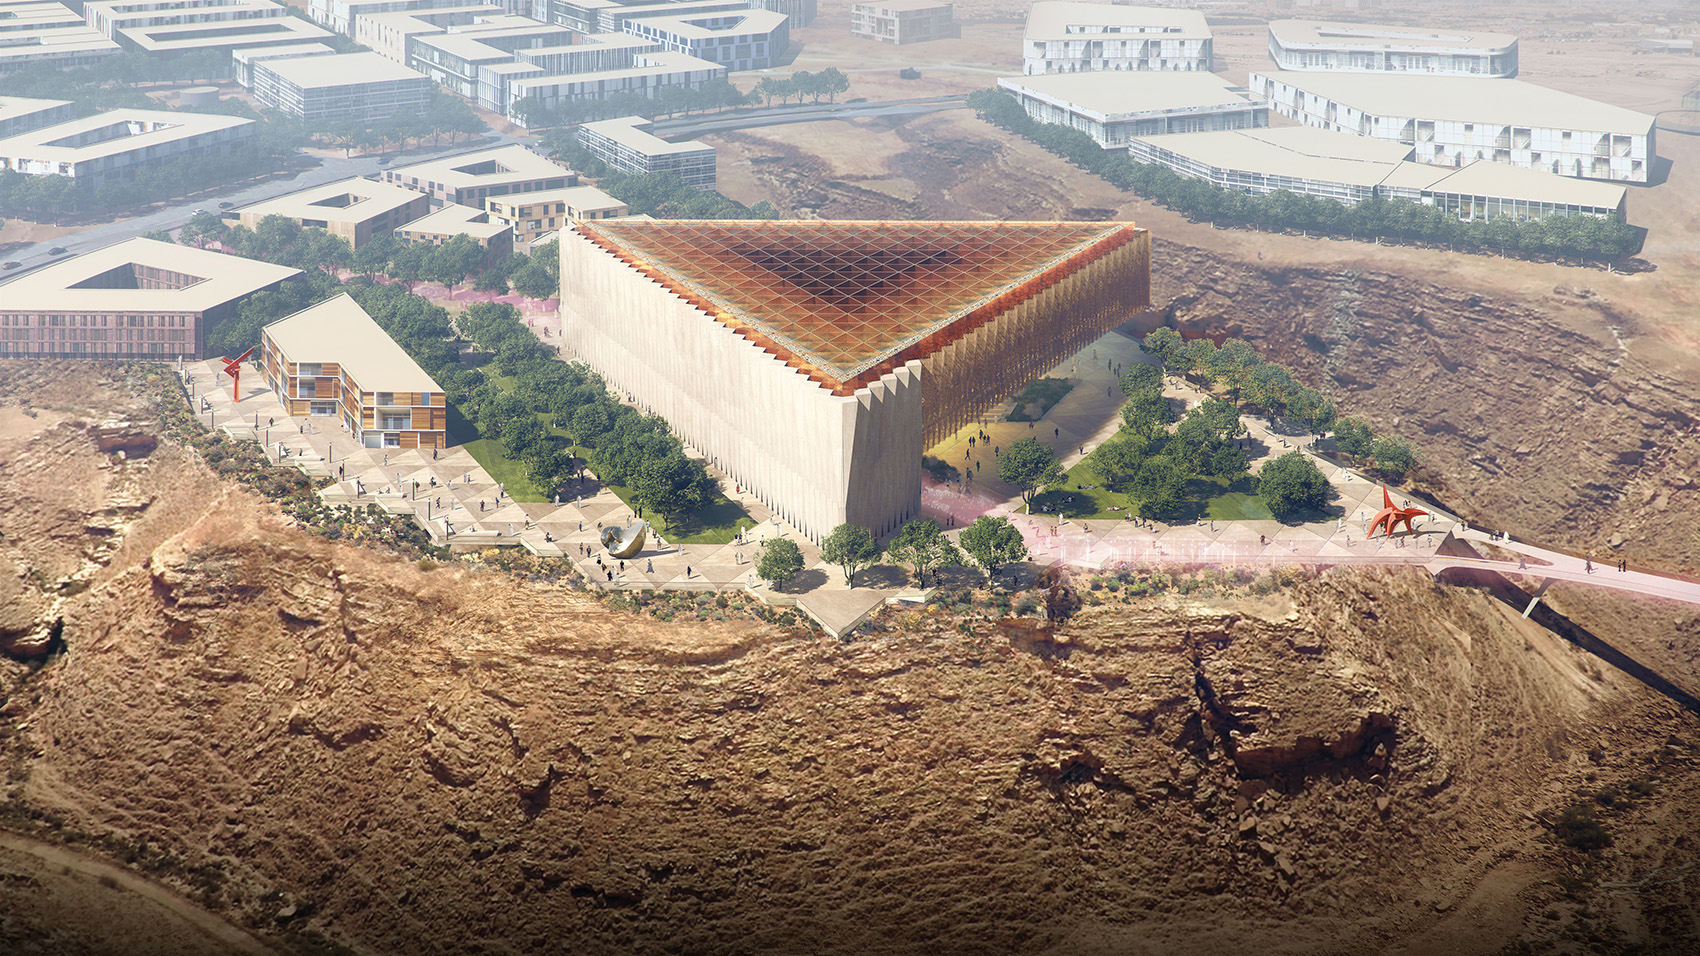 Details About New Headquarters For Mohammed bin Salman Foundation “Misk” Announced